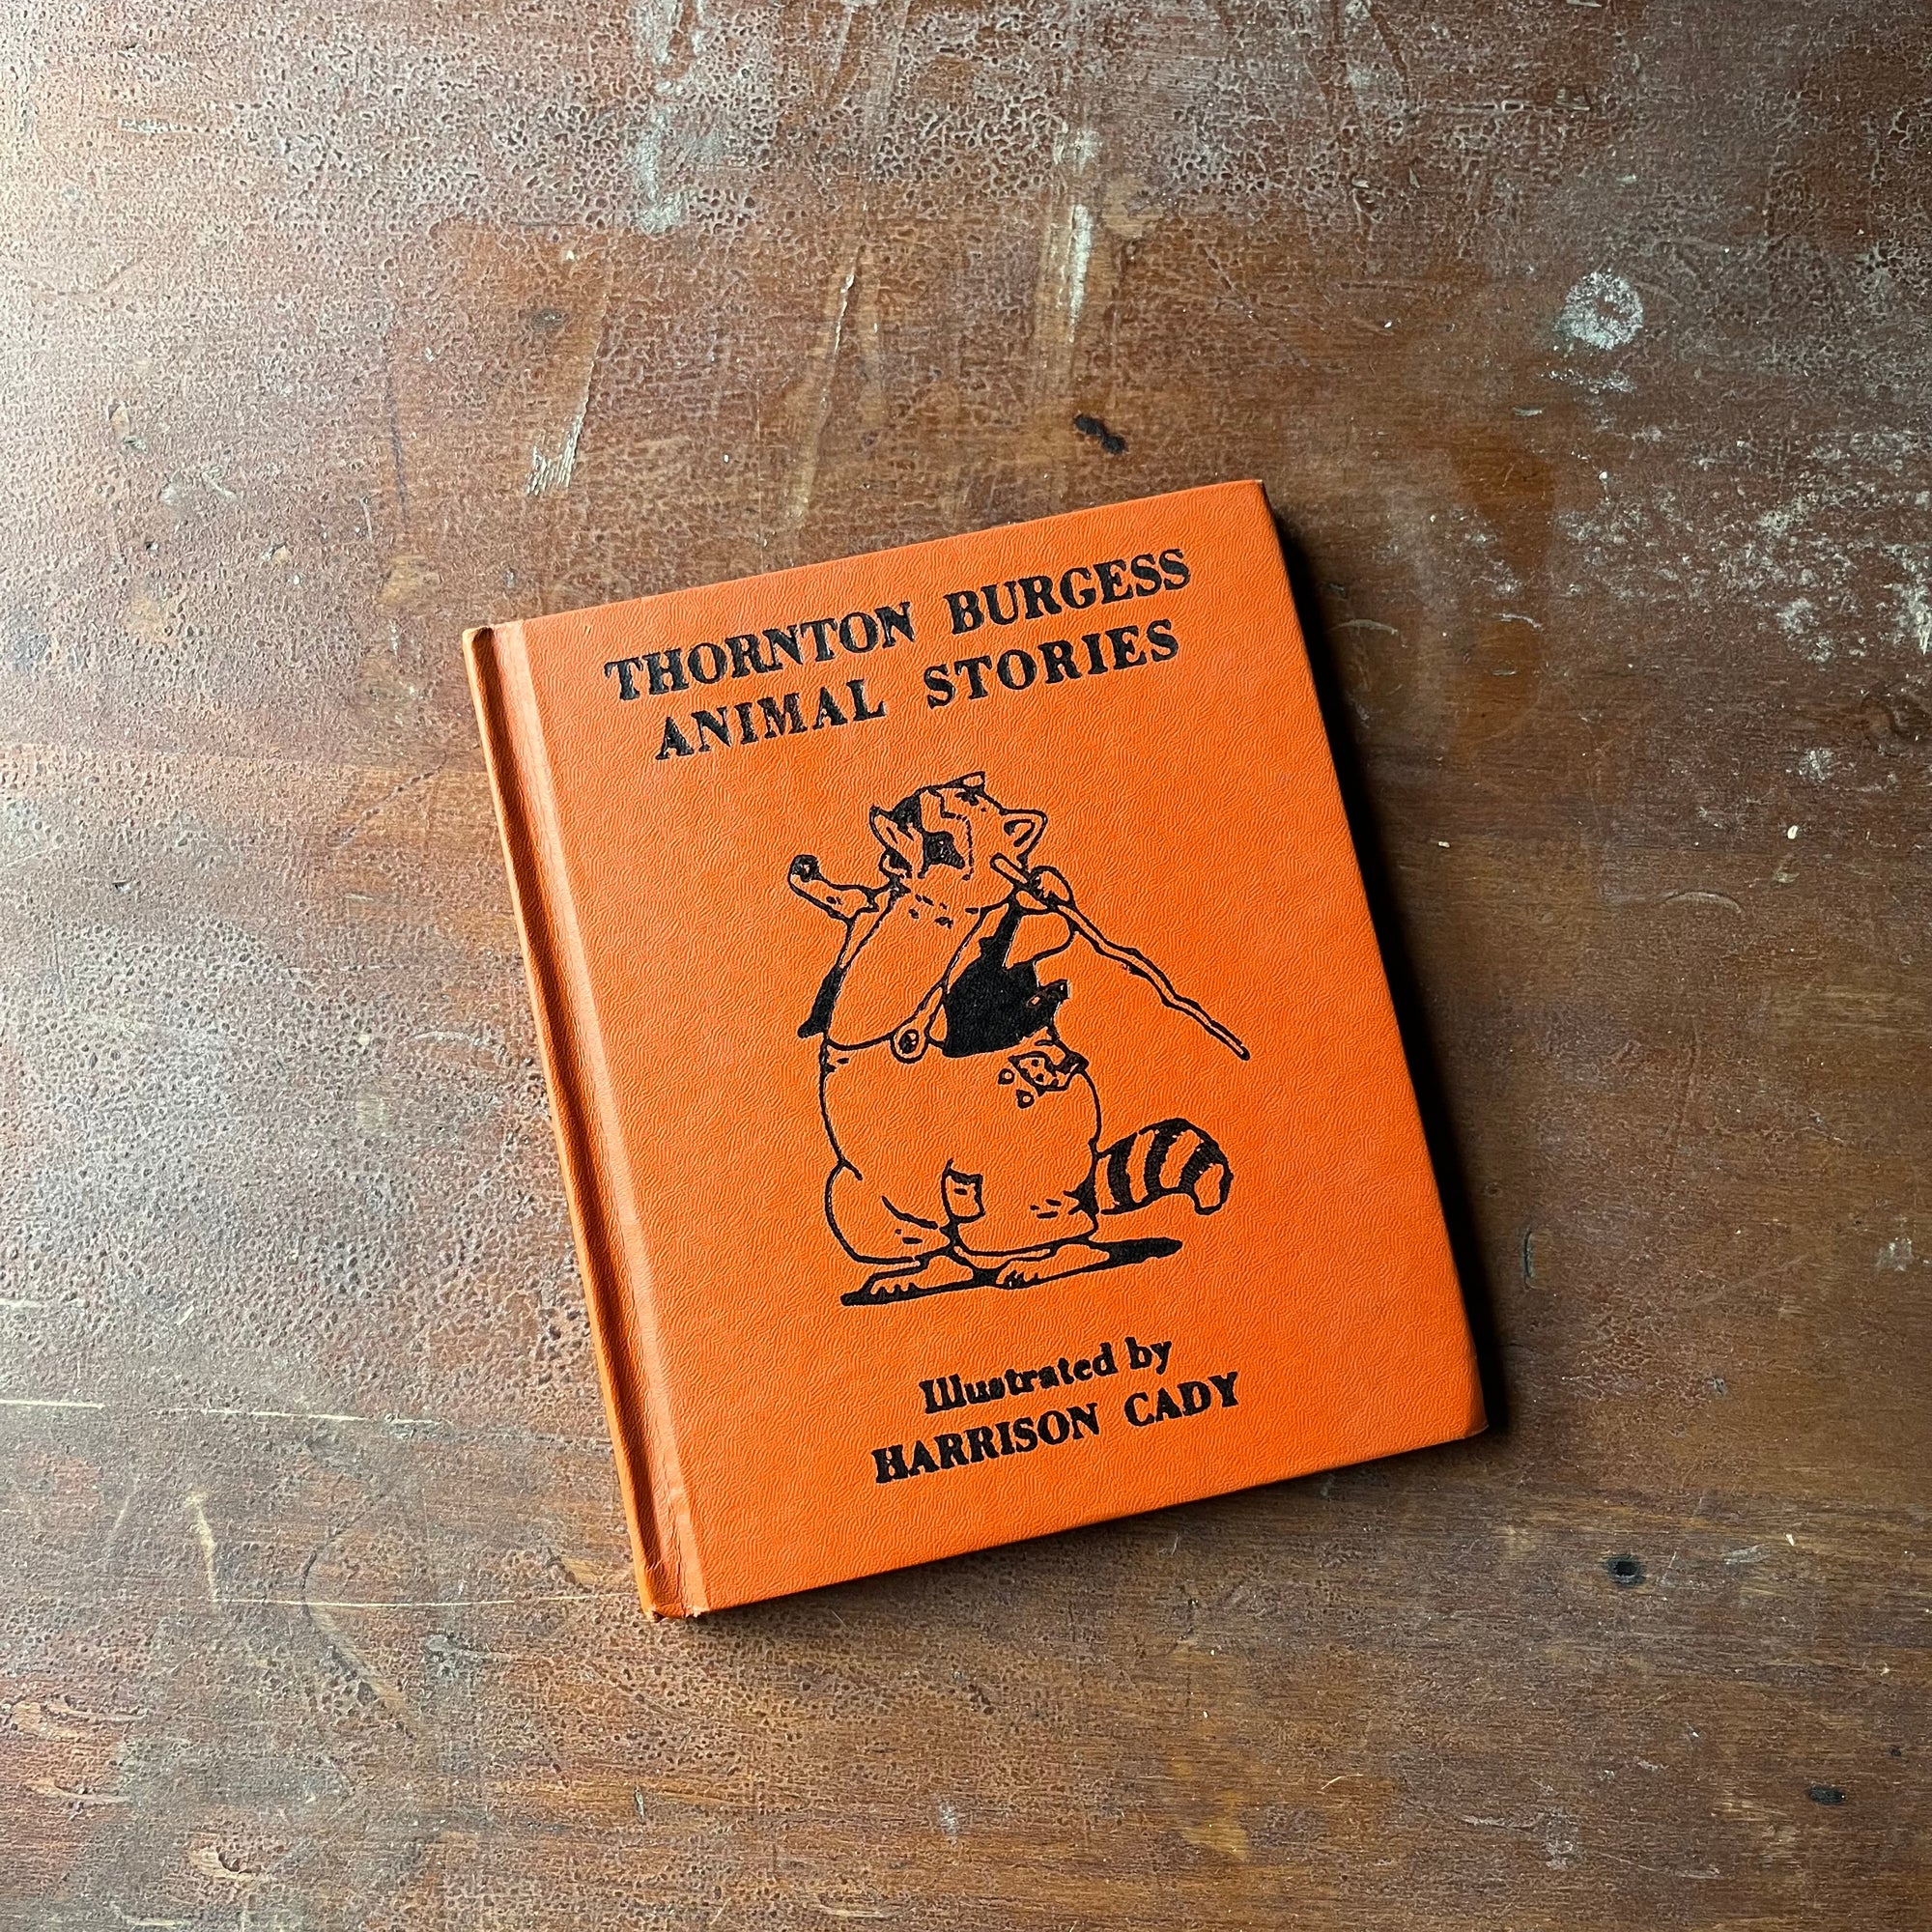 Thorton Burgess Animal Stories with illustrations by Harrison Cady-1942 Edition-antique children's storybook-view of the embossed front cover with a raccoon on it - orange background with black embossing